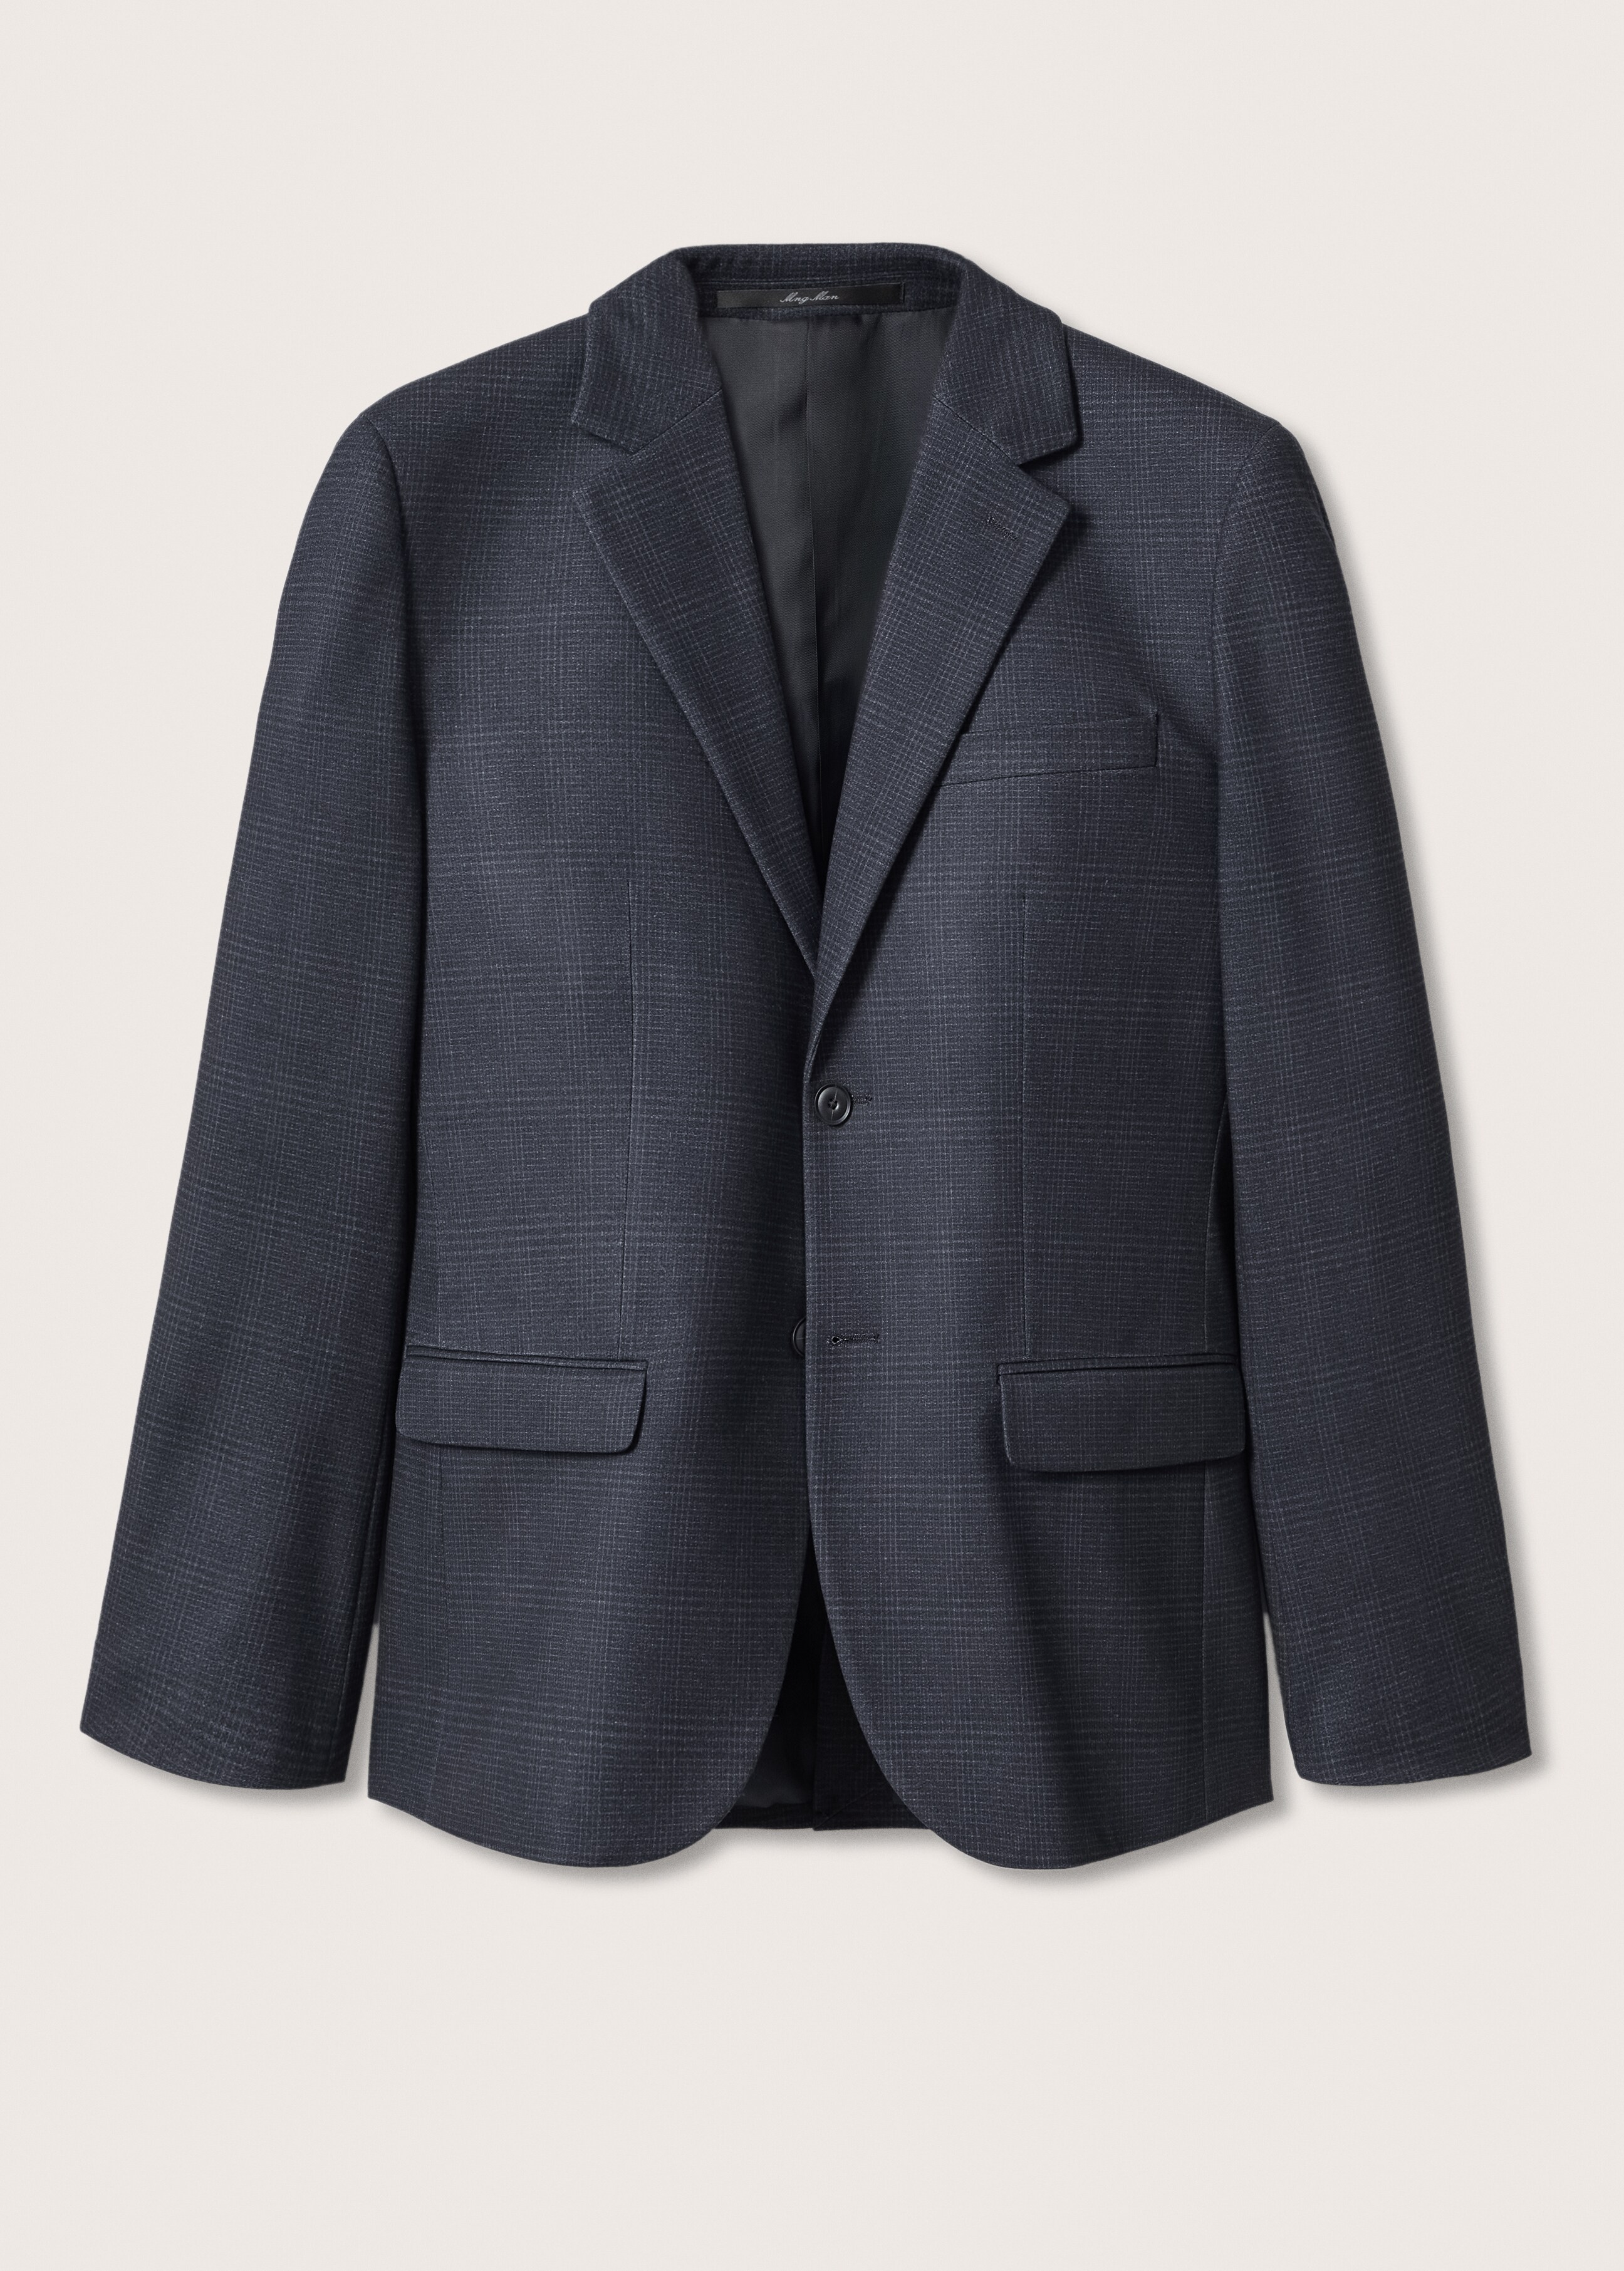 Prince of Wales blazer - Article without model